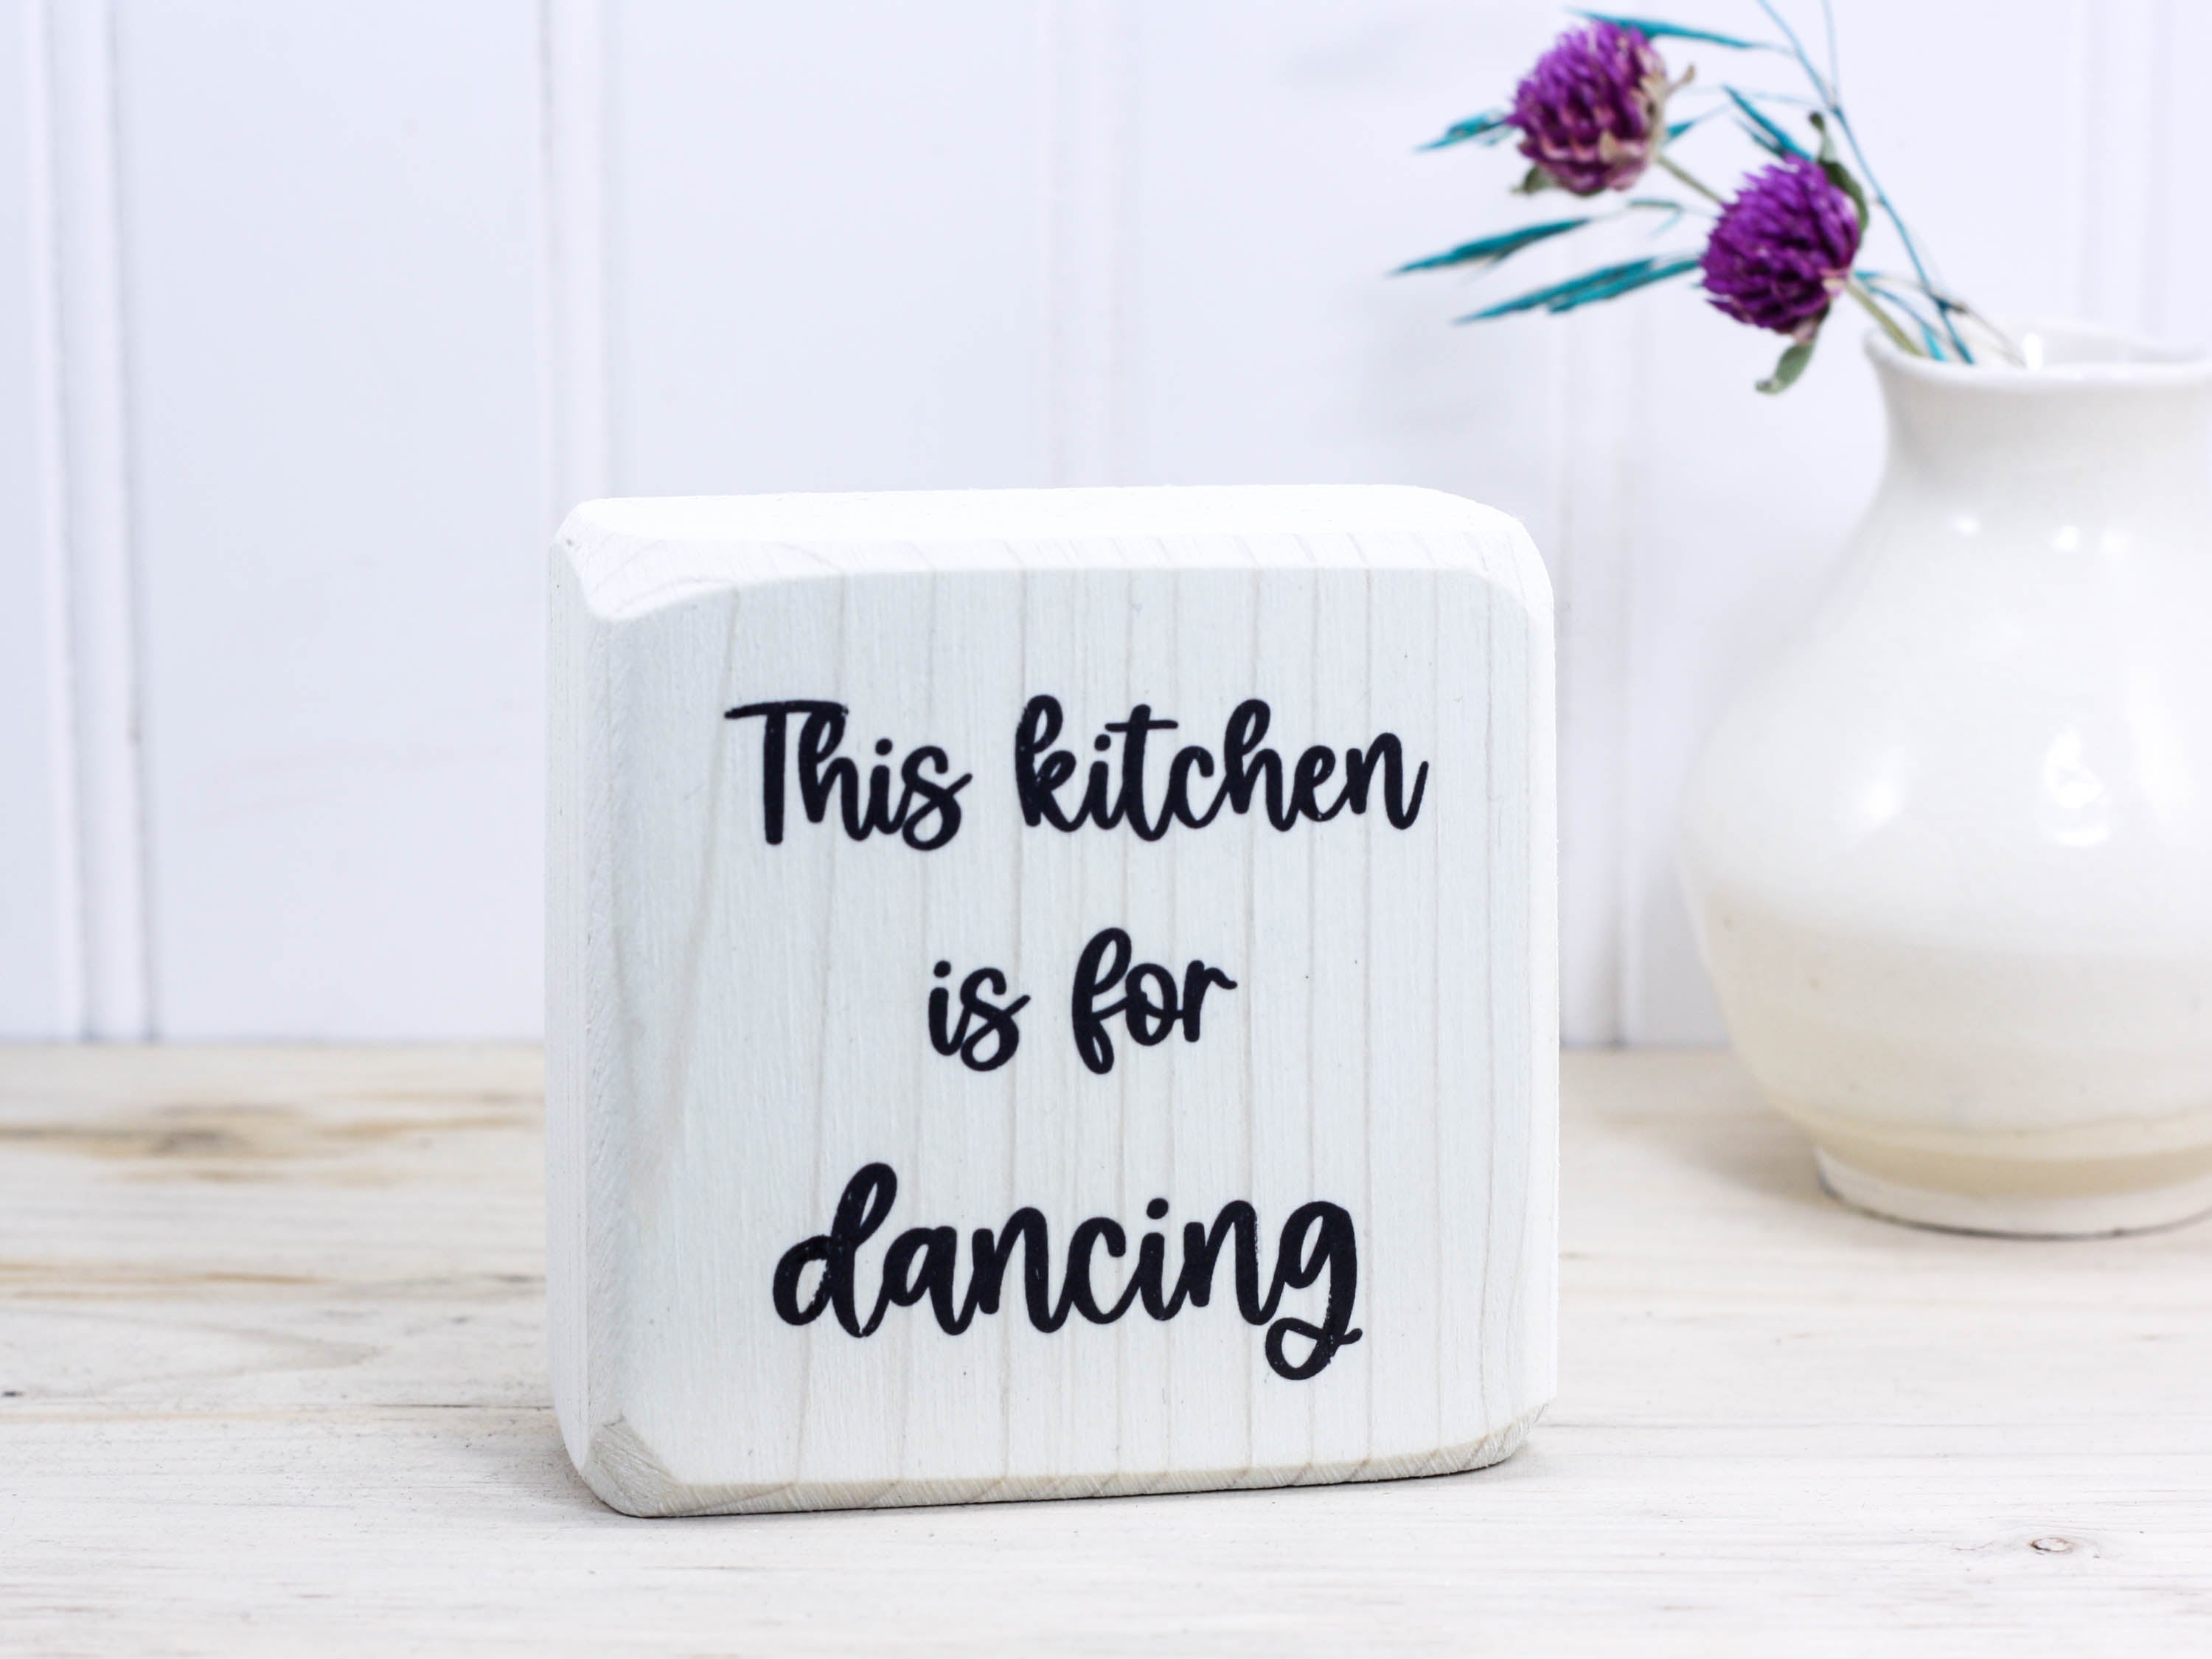 Small wooden decor in whitewash with the saying "This kitchen is for dancing".